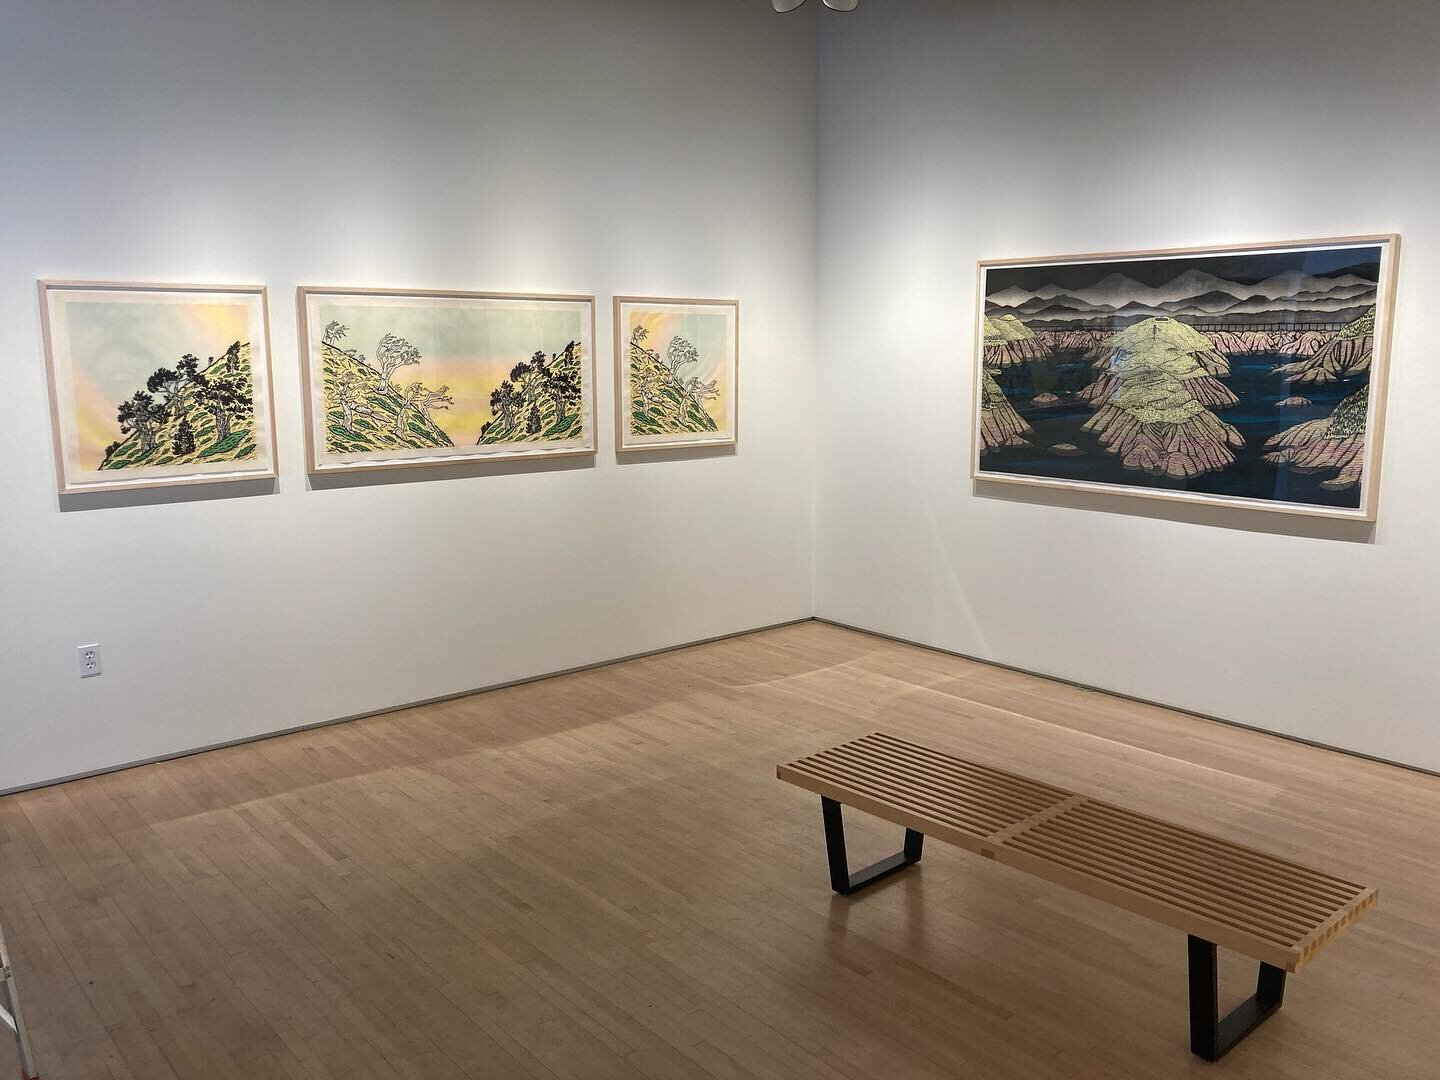 A few more images of McKnight exhibition @highpointprints .  The gallery is open 9-5 during the week and 12-4 on Saturdays.  I hope you can catch it in person. 

#printmaking #woodcut #screenprinting #lithography